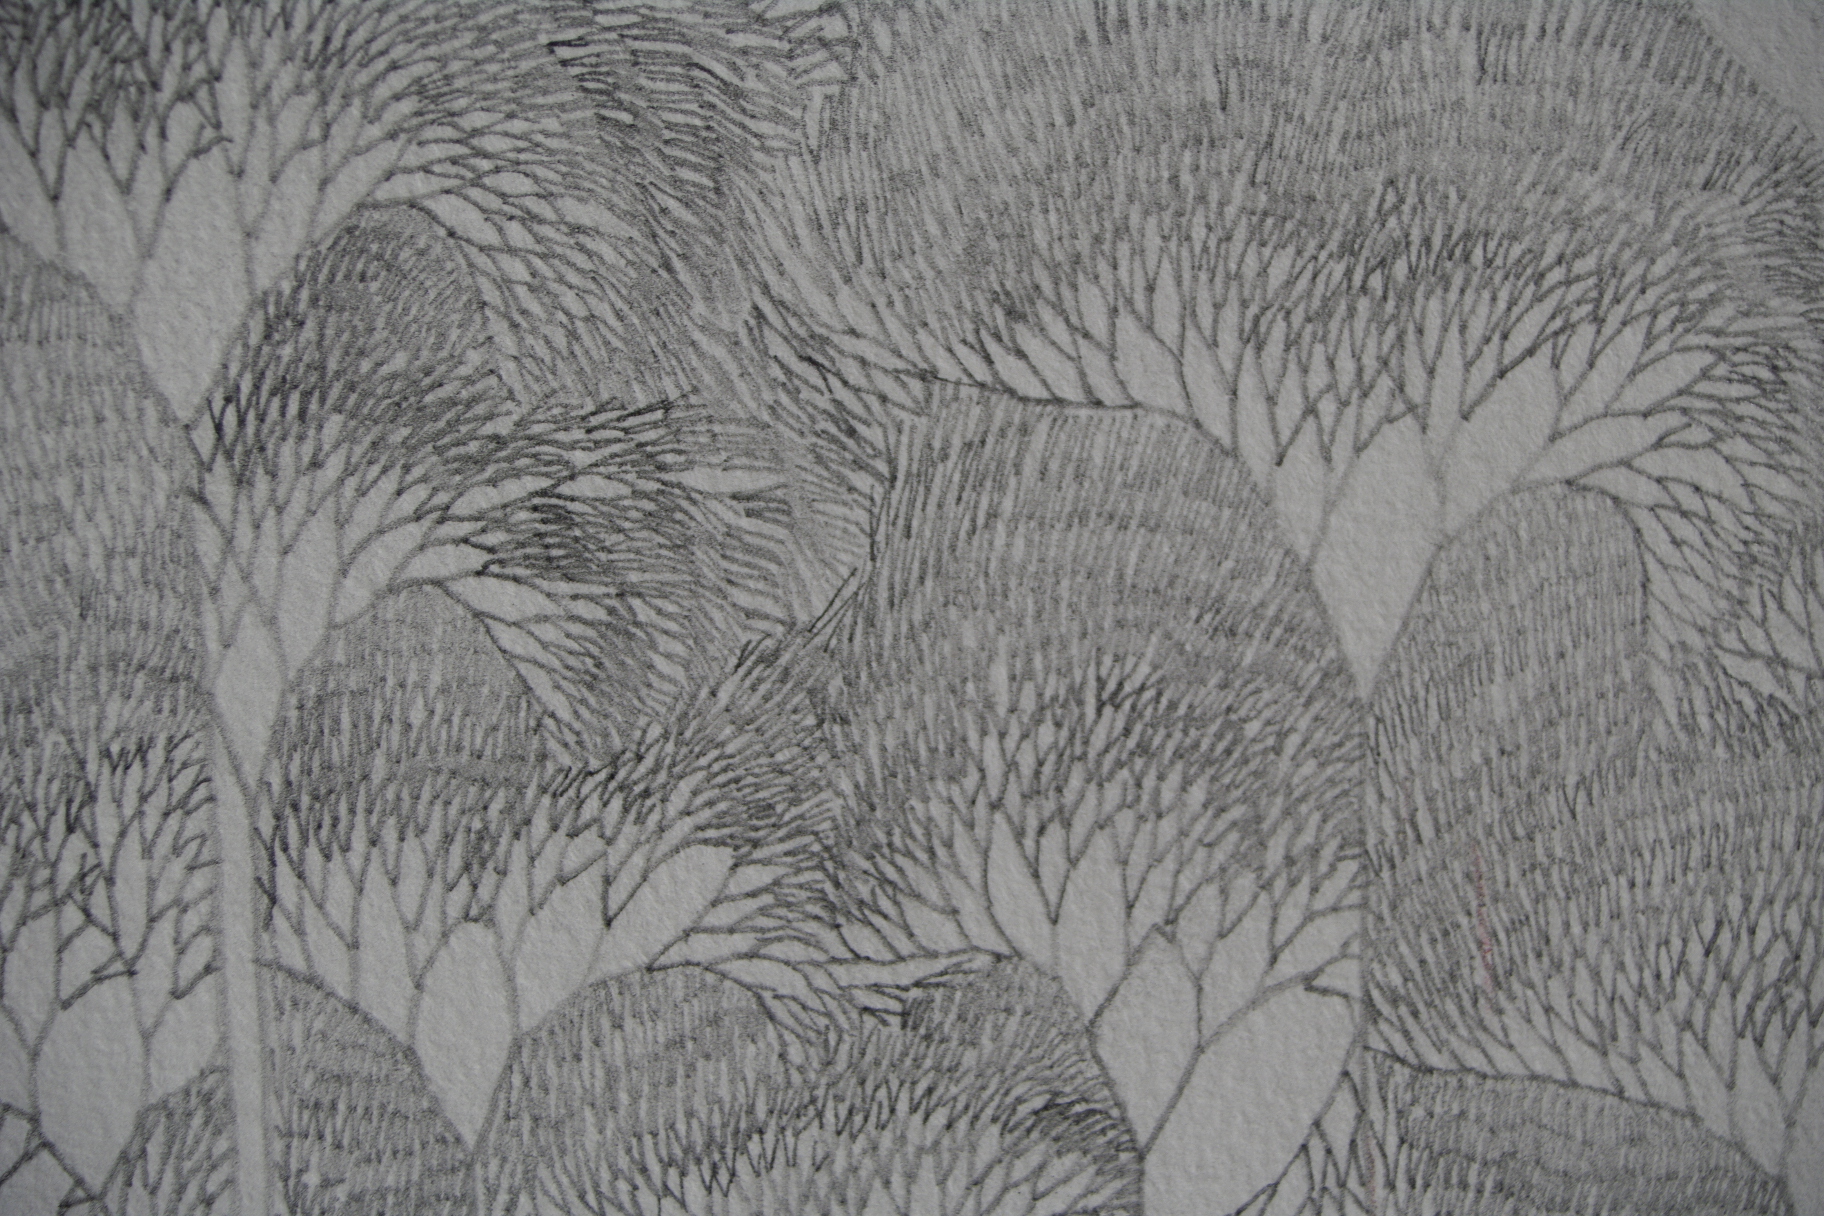 detail of graphite pencil drawing of tree-like, fractally branching lines